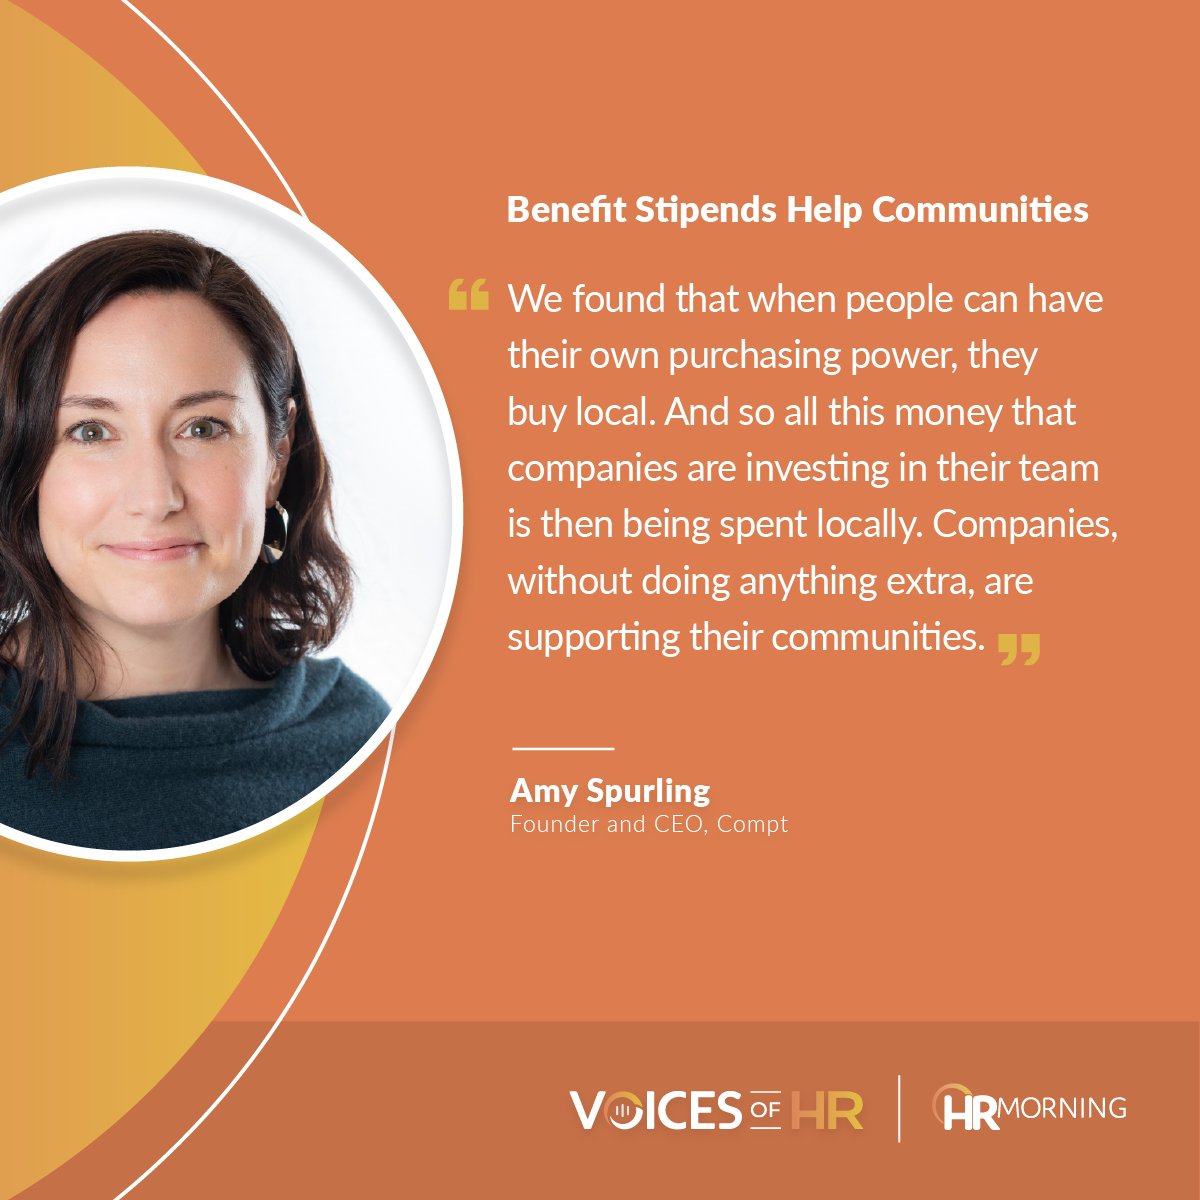 When people have purchasing power, they buy local. And that helps the whole community. Founder and CEO of @ComptHQ, @AmySpurling, talked about that and much more on the latest #VoicesofHR episode. Listen here: rfr.bz/t8wr5wm